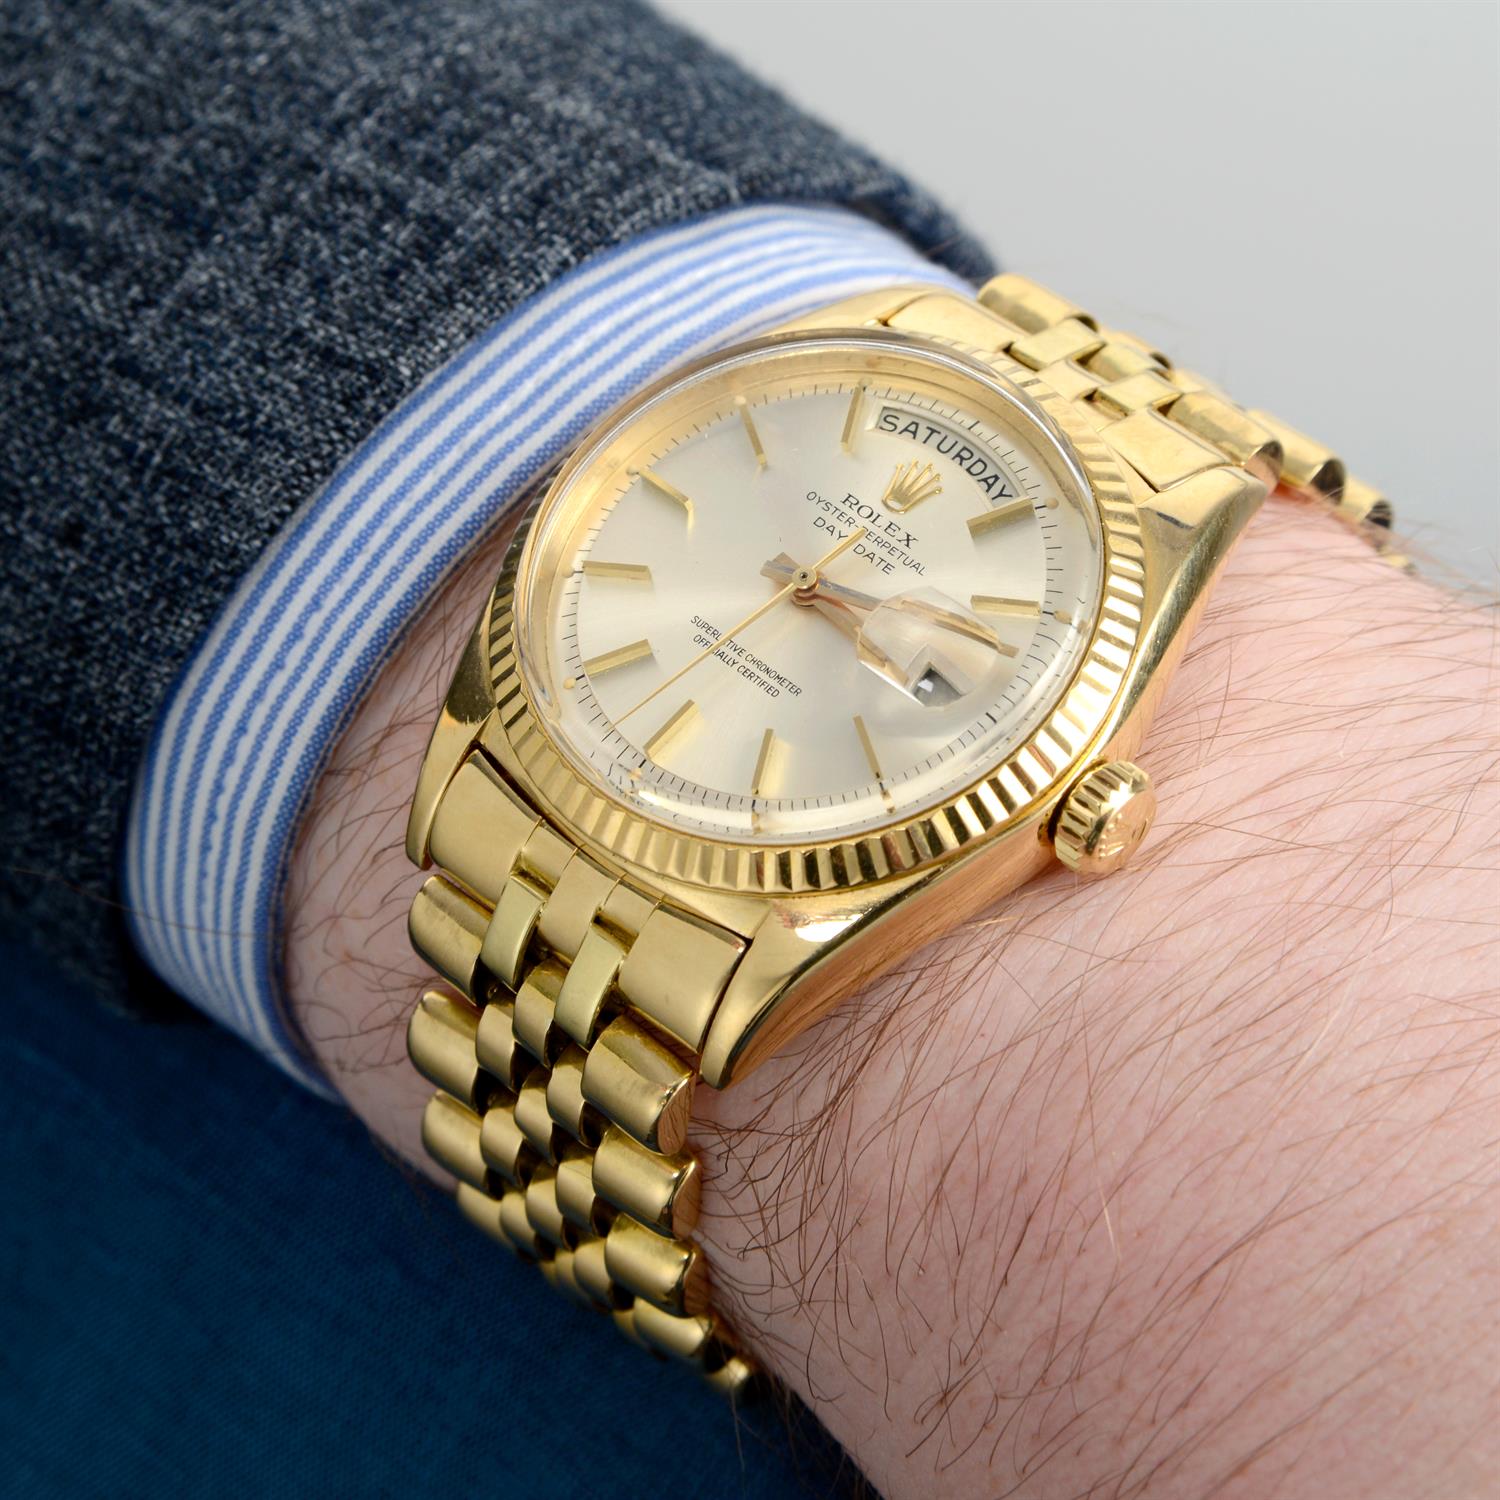 Rolex - an Oyster Perpetual Day-Date watch, 36mm. - Image 6 of 6